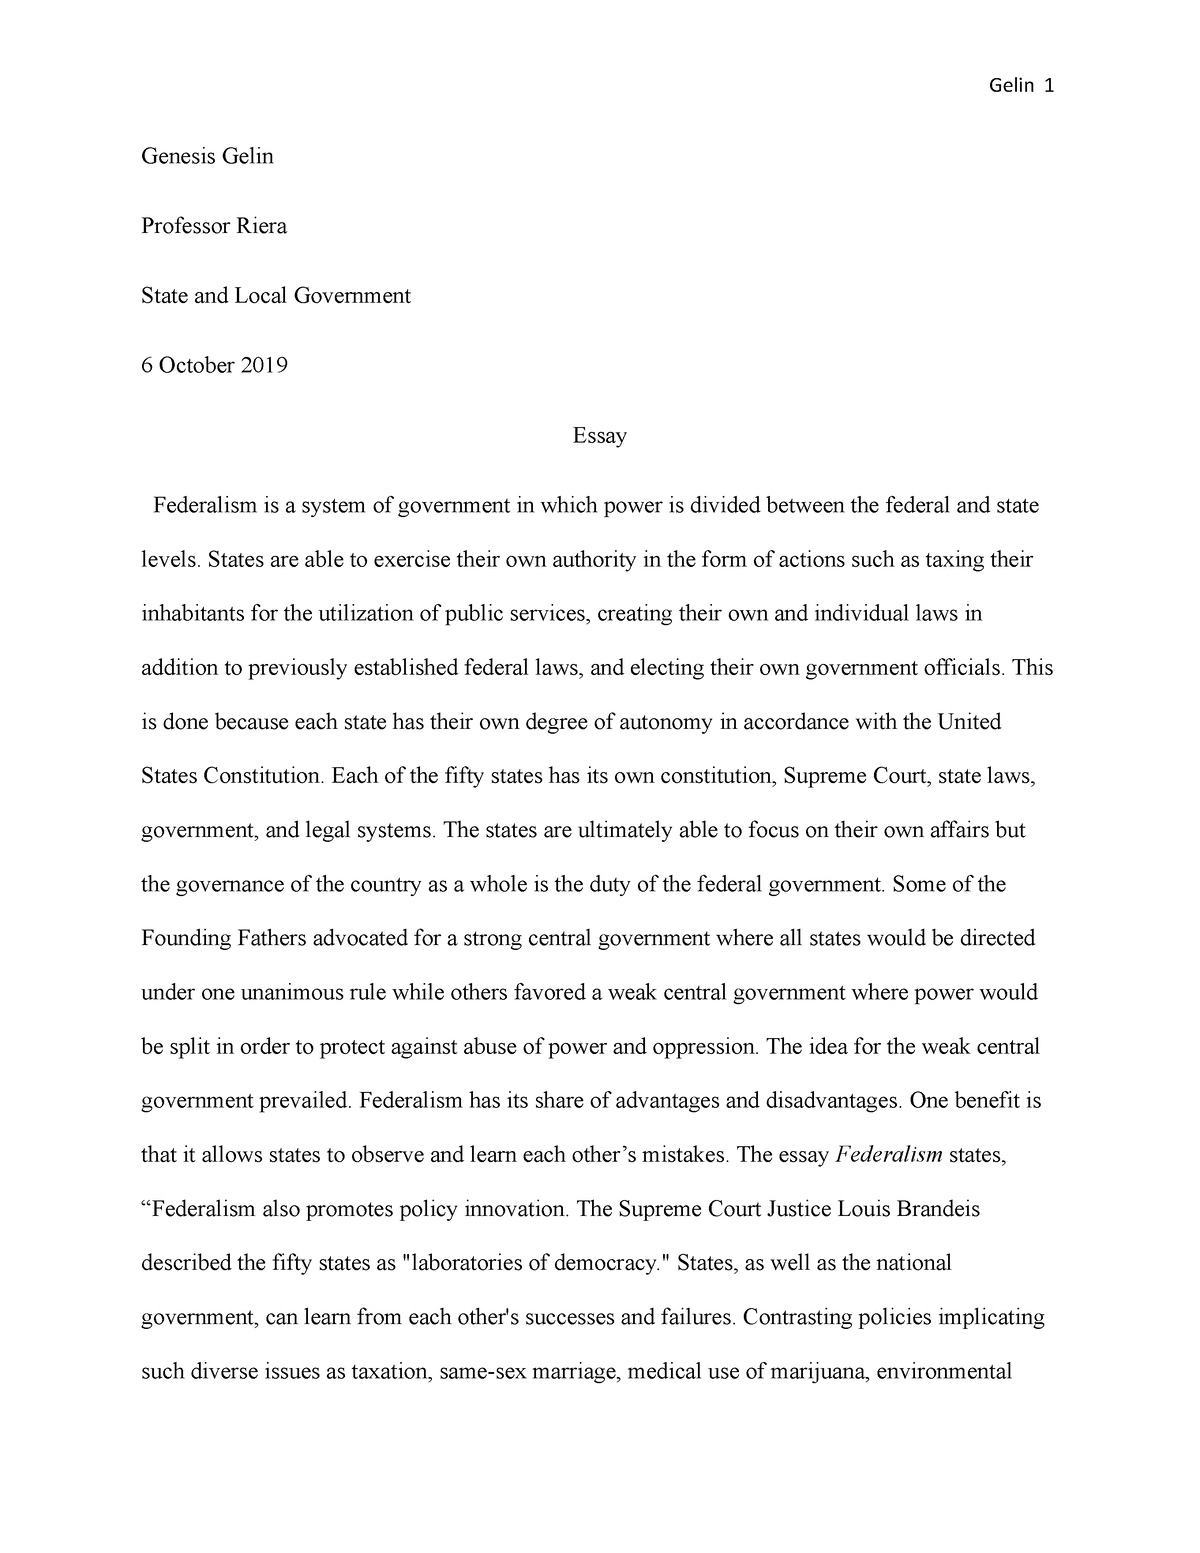 essay about federalism objectives